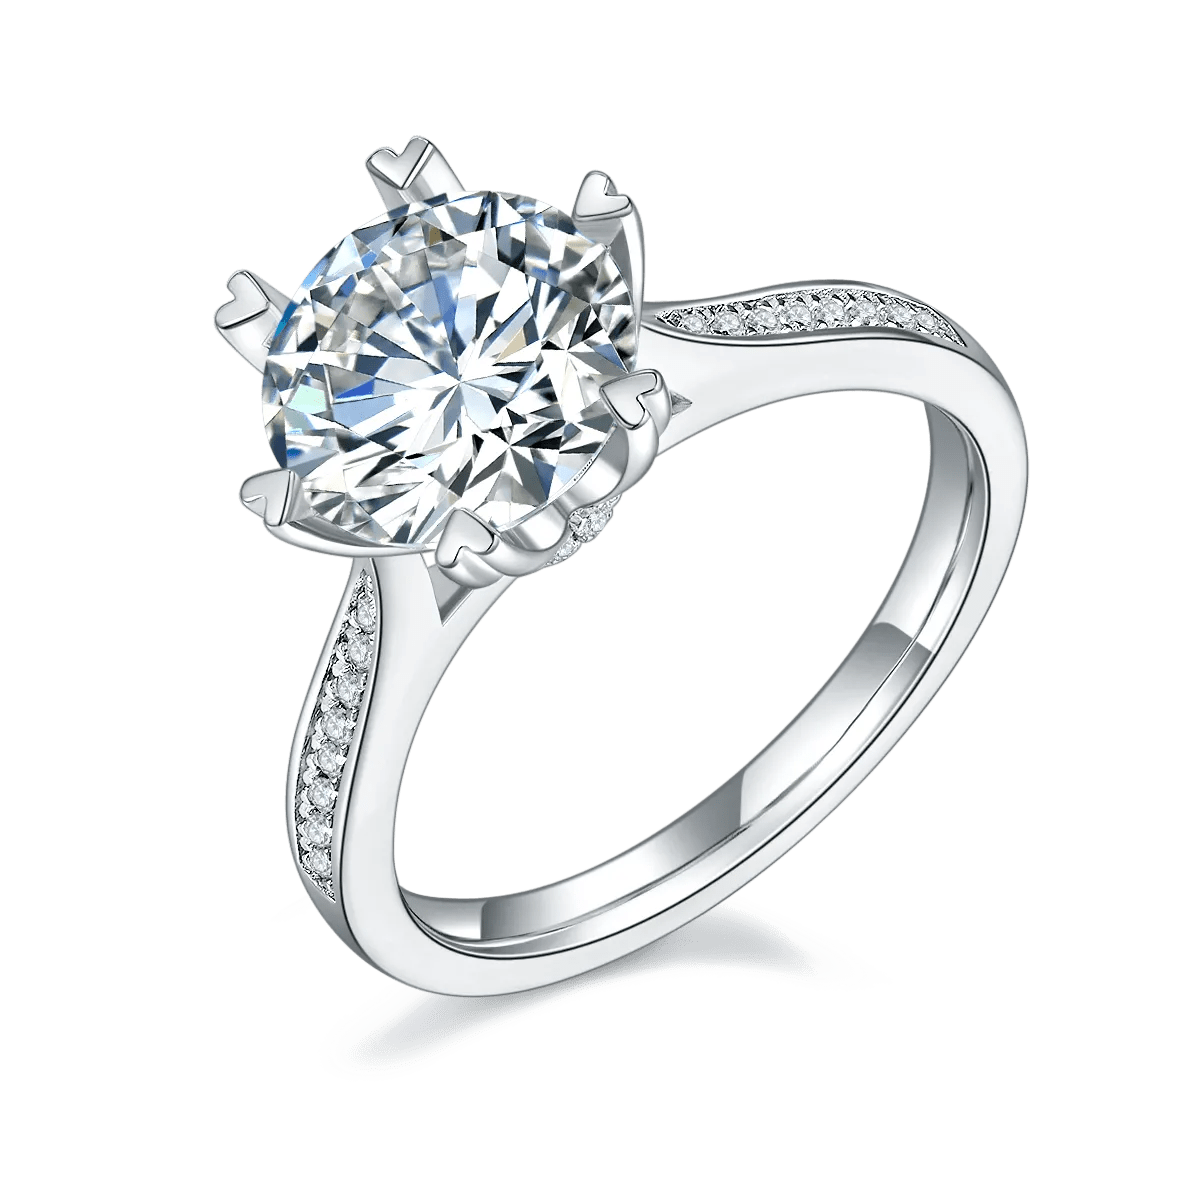 VVS Jewelry hip hop jewelry 4.5 3CT S925 Sterling Silver 6-Prong Cathedral Heart Engagement Ring